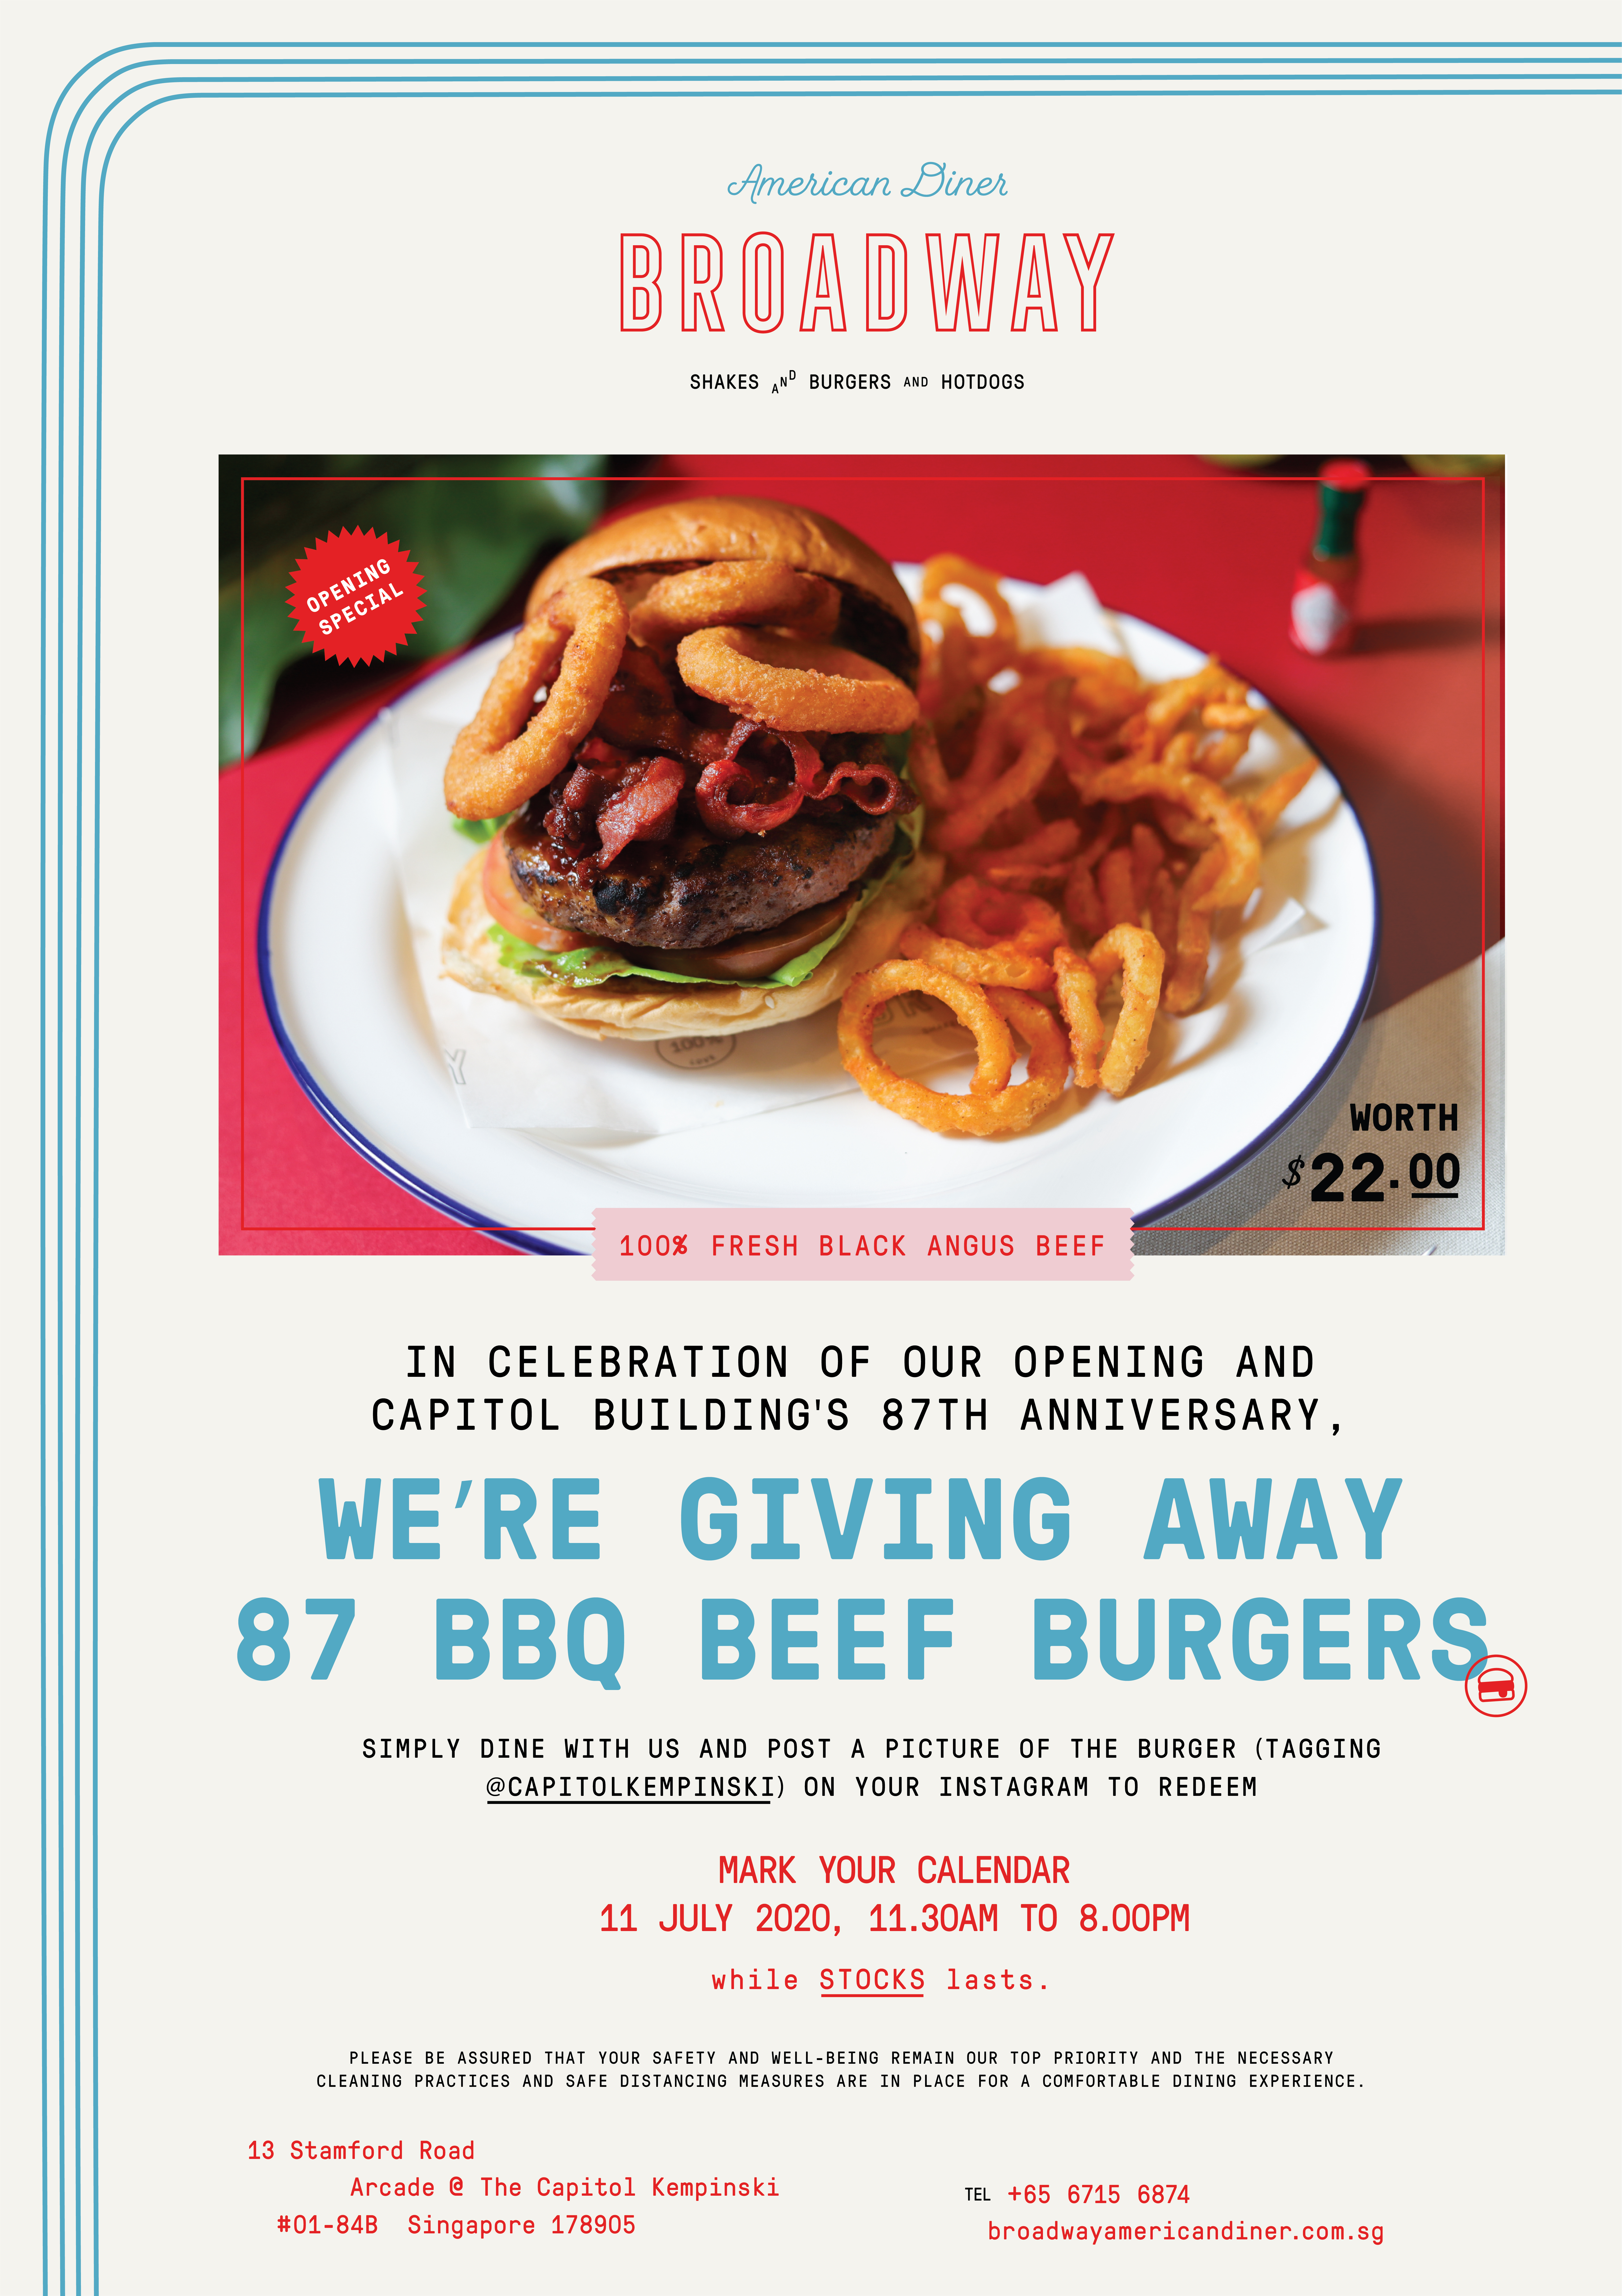 ONE DAY ONLY: Complimentary BBQ Beef Burgers at Broadway! | Why Not Deals 1